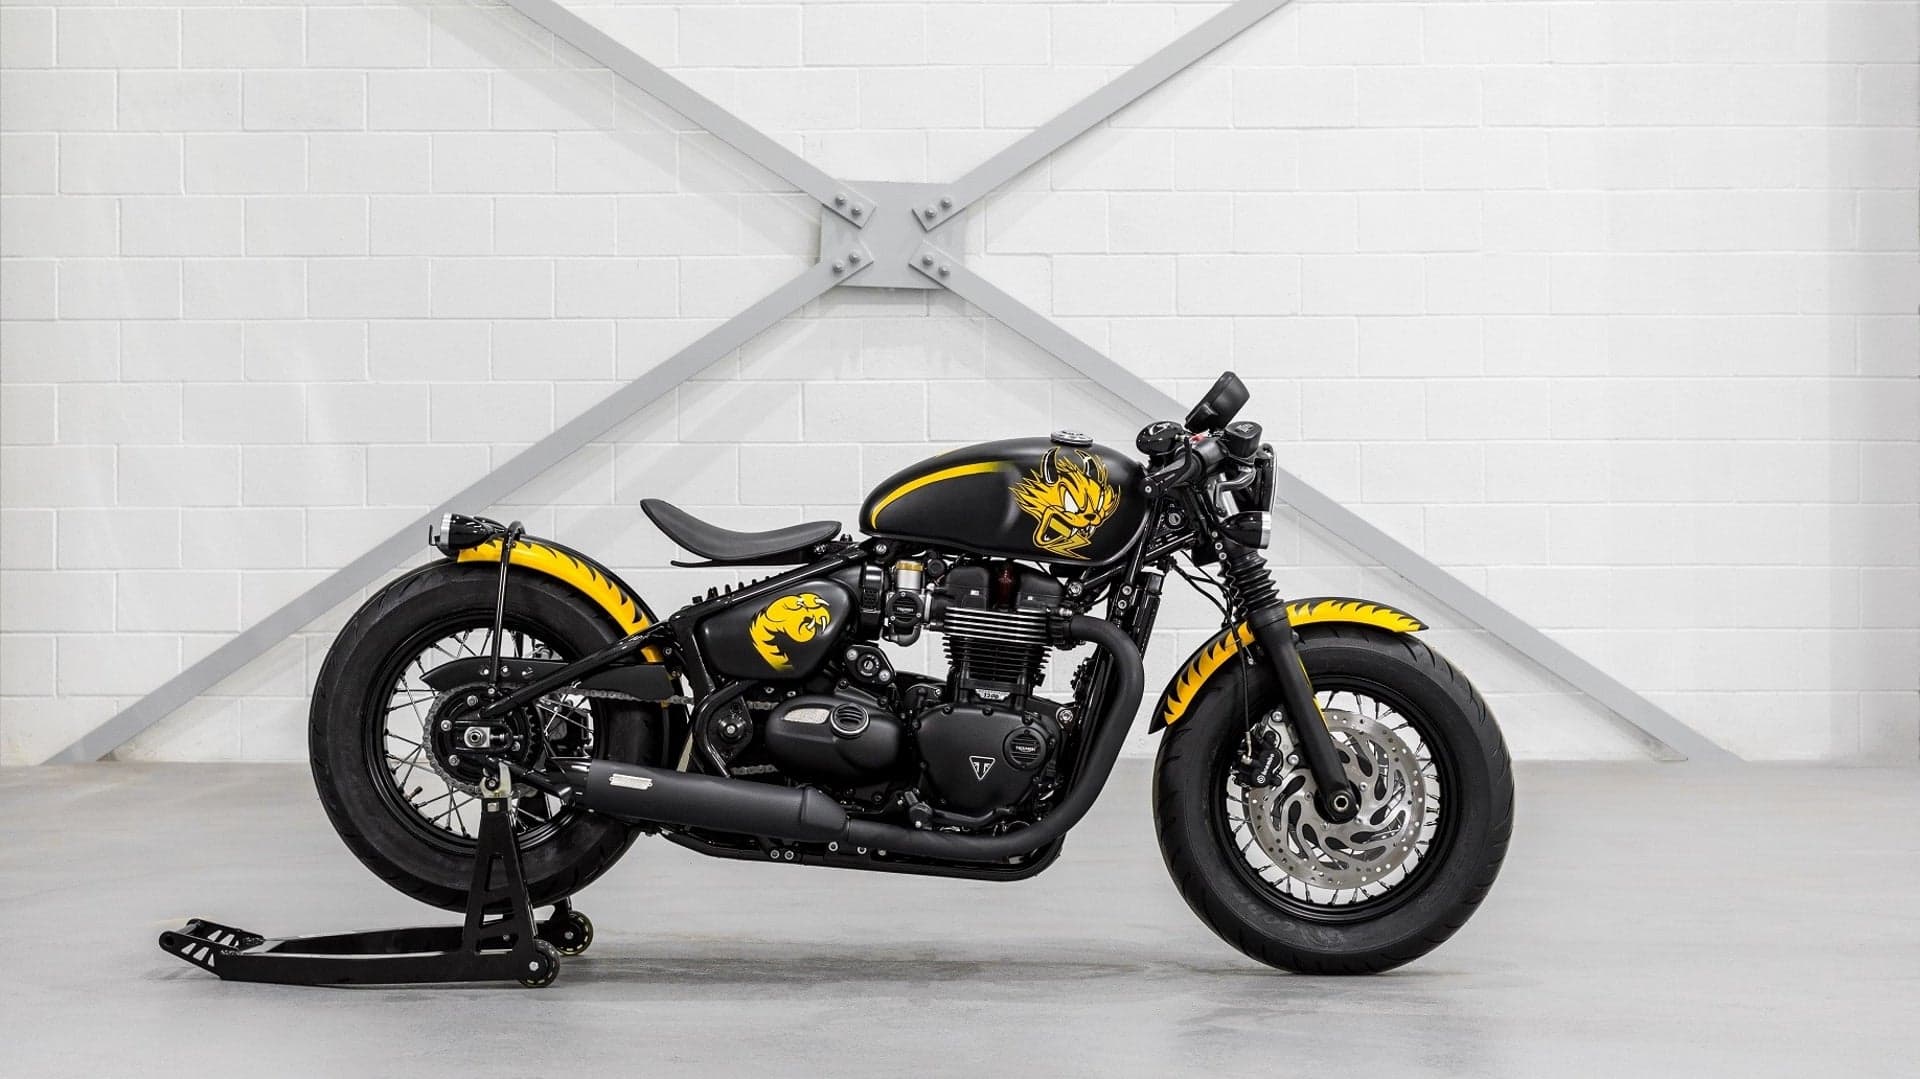 You Could Win One of These Beautifully Customized Spirit of ’59 Triumph Motorcycles